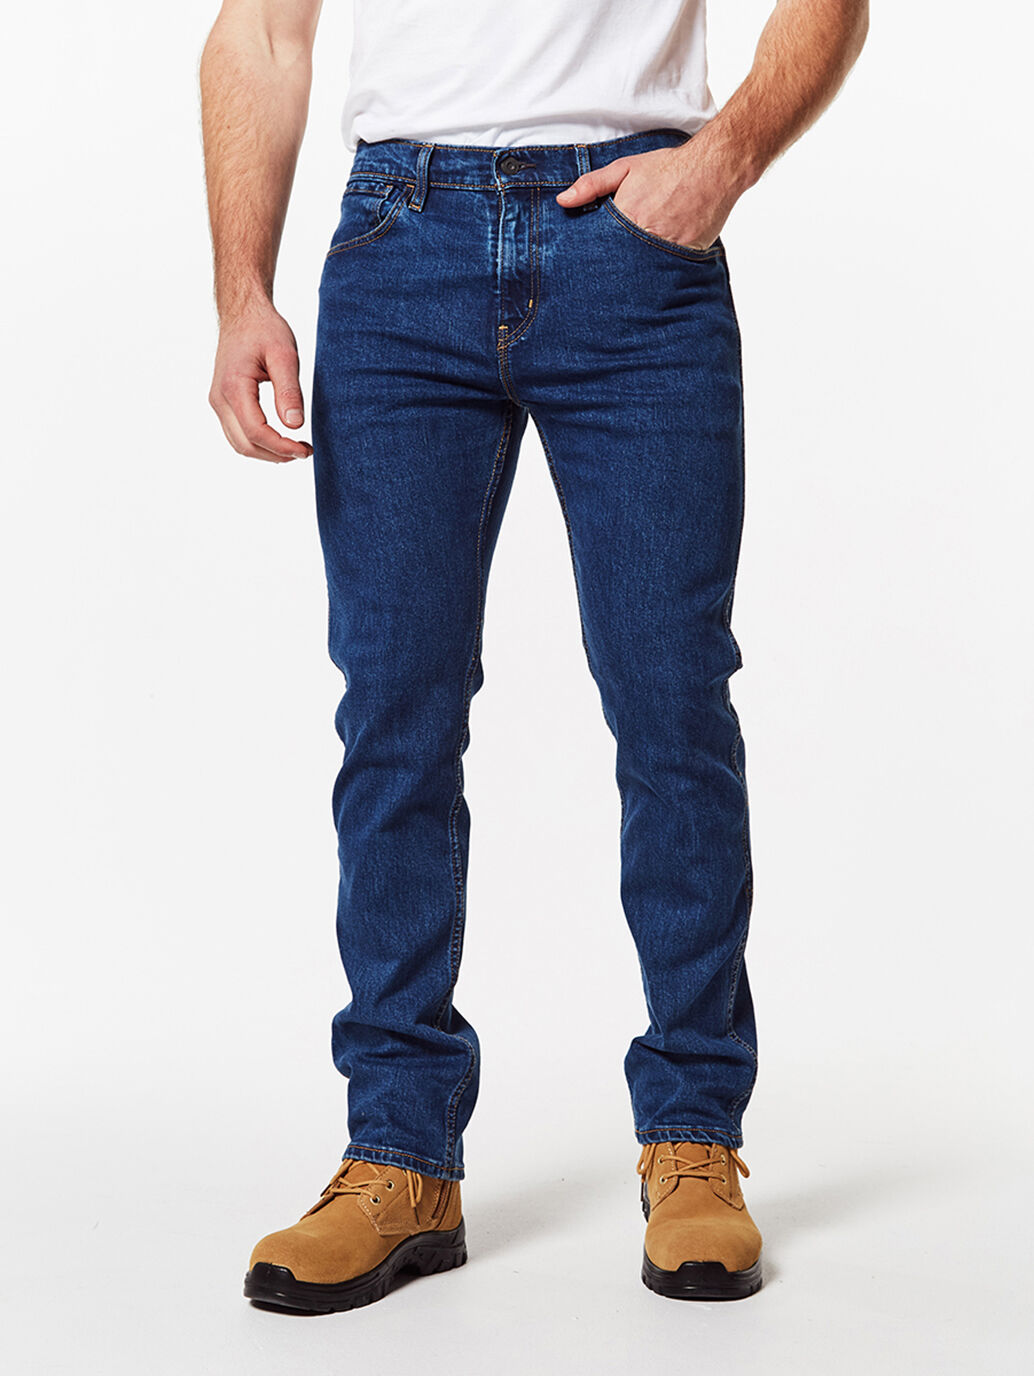 levi's 505 straight fit mens jeans